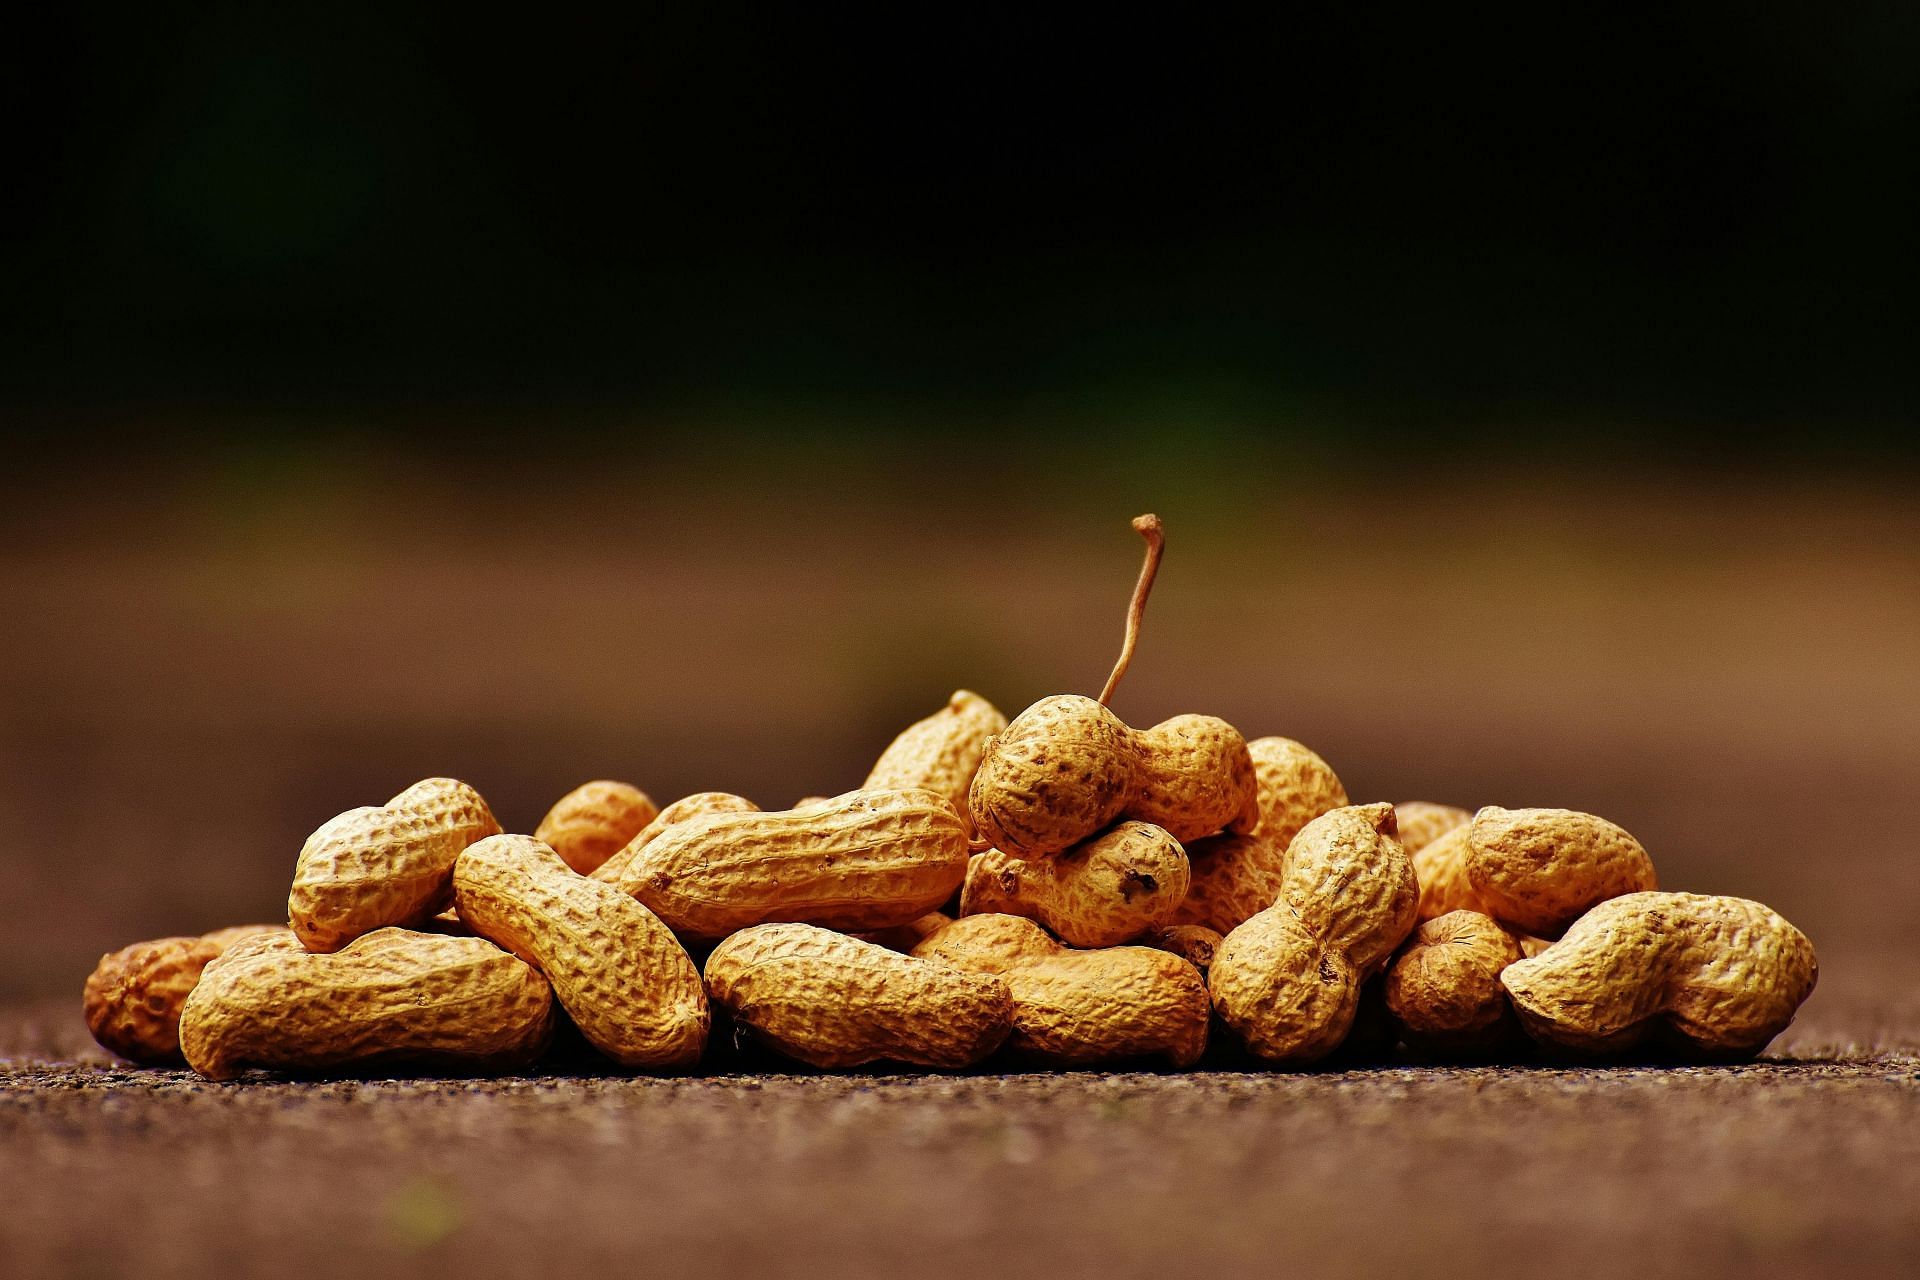 Peanuts are food to stimulate brain (Image sourced via Pexels / Photo by pixabay)